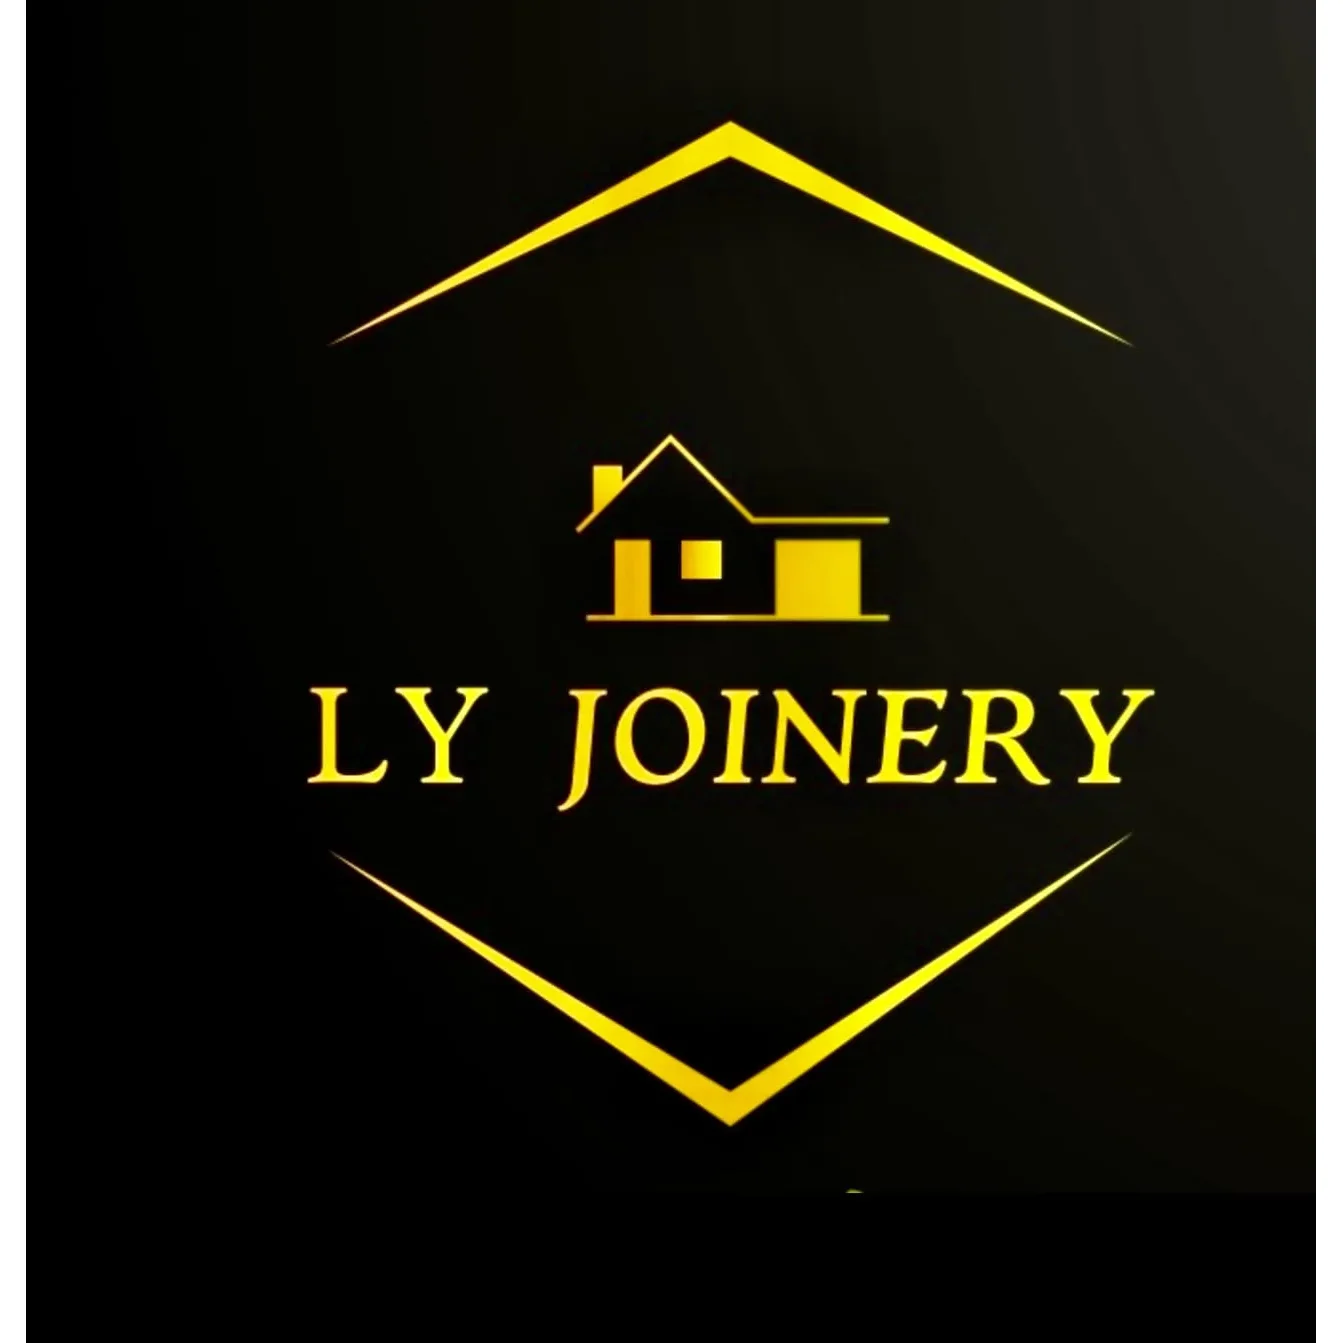 LY Joinery Ltd - Rossendale, Lancashire BB4 4JN - 07849 048165 | ShowMeLocal.com